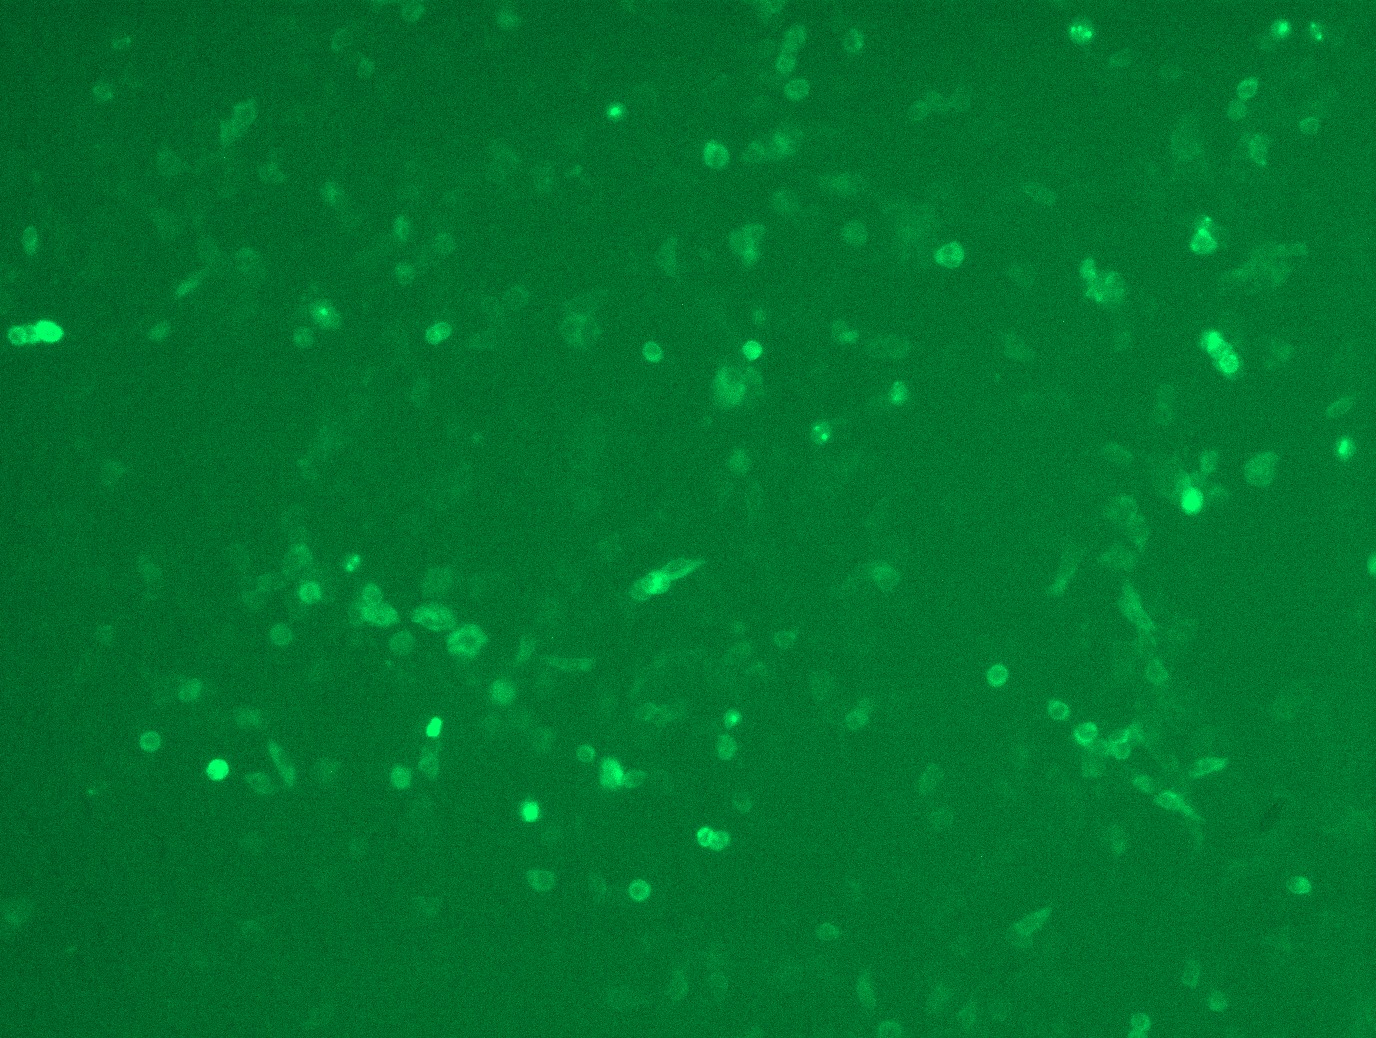 MR210770L4 was used to prepare Lentiviral particles using TR30037 packaging kit. HEK293T cells were transduced with MR210770L4V particle to overexpress human Dlgap5-mGFP fusion protein.